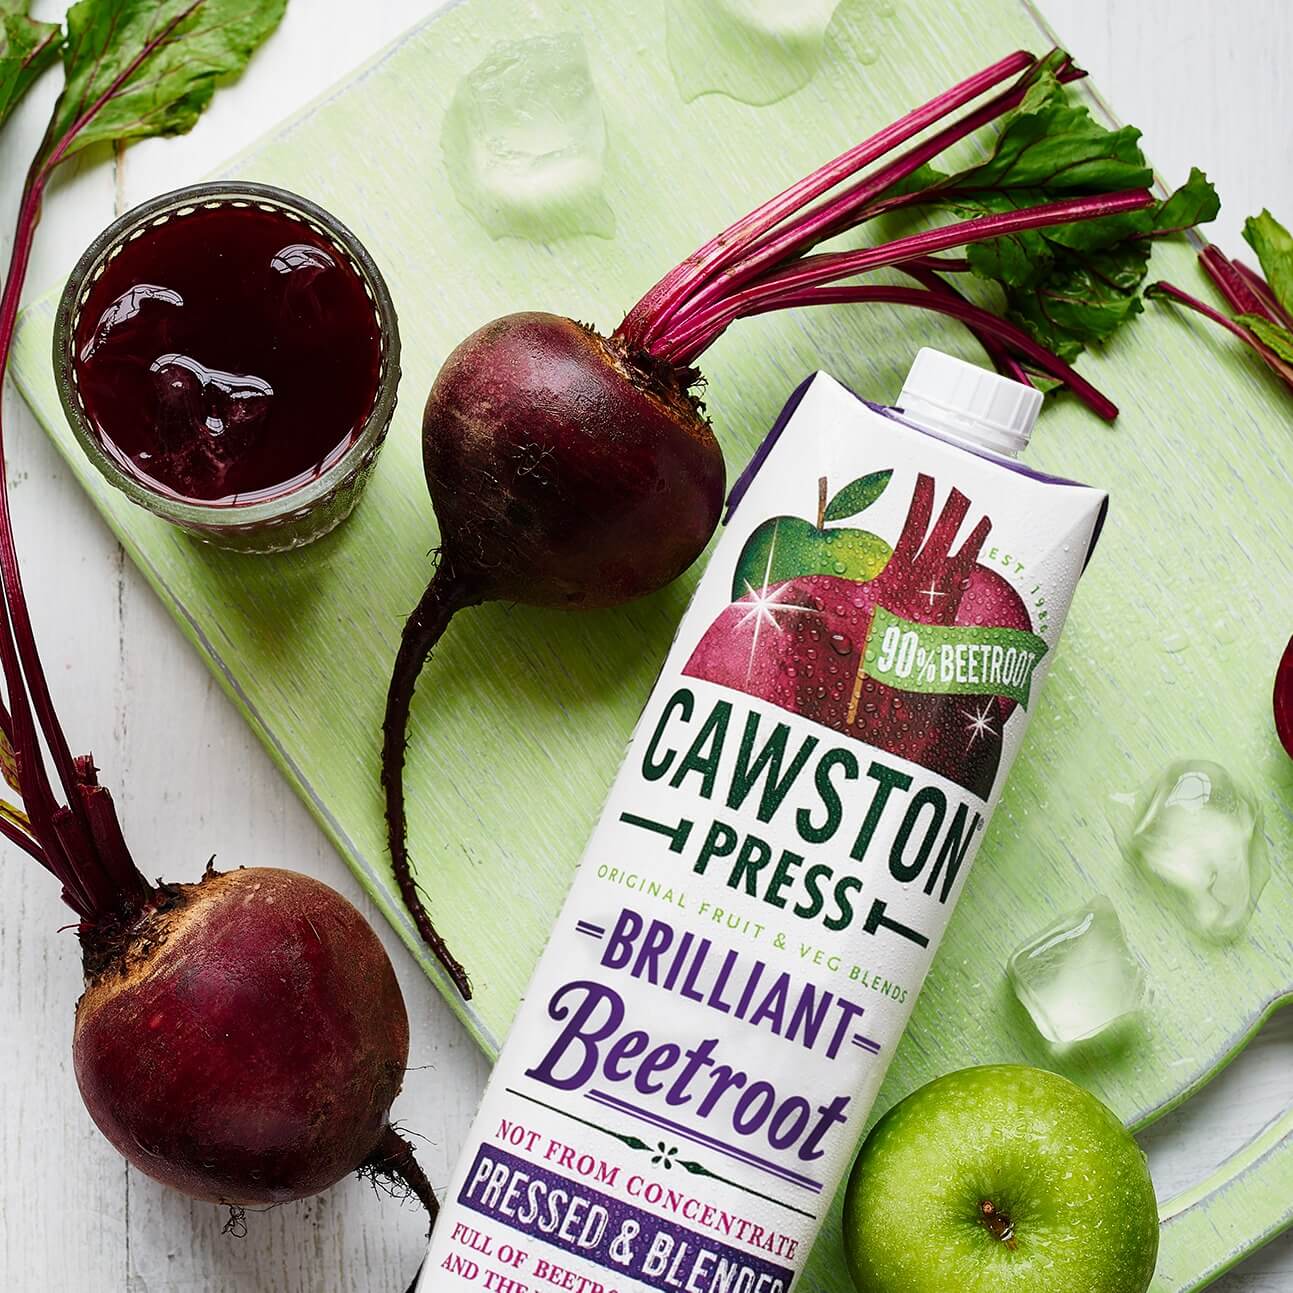 A glimpse of diverse products by Cawston Press, supporting the UK economy on YouK.